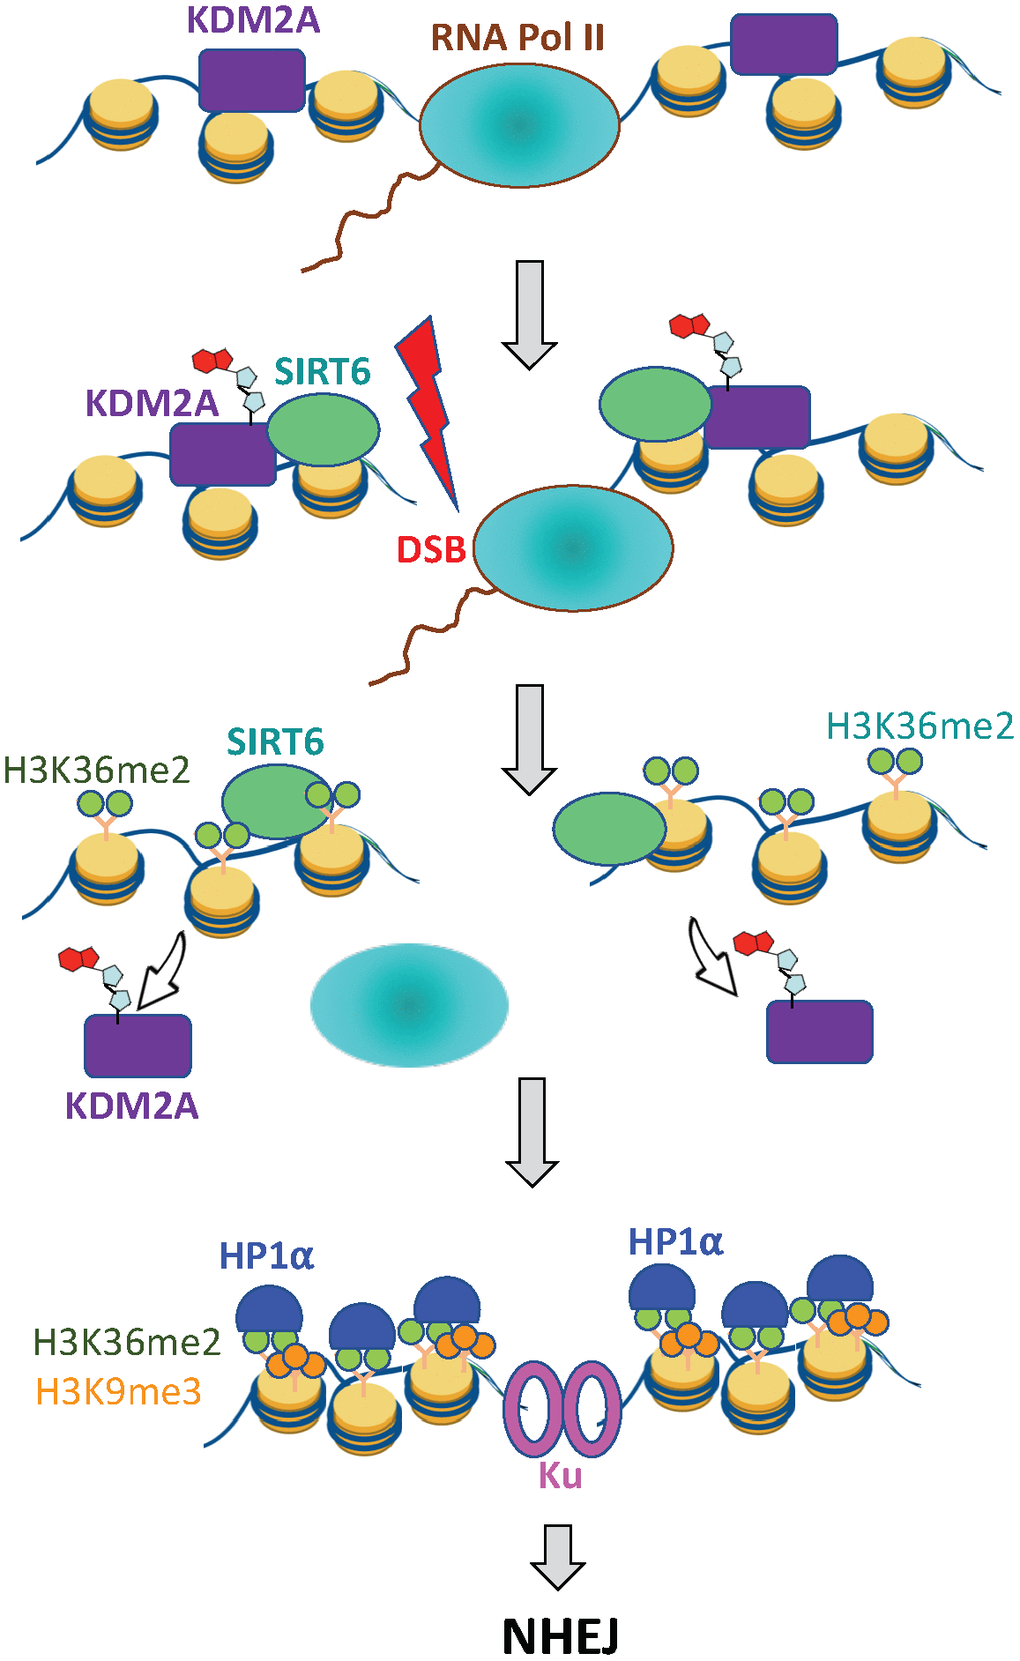 SIRT6 prevents collision between transcription and DSB repair machineries. Under basal conditions KDM2A demethylates H3K36 at transcription start site. Upon DNA damage SIRT6, is recruited to the DSB locus and mono-ADP ribosylates KDM2A leading to its displacement from chromatin. This leads to accumulation of H3K36me2 marks around the DSB site, which recruits HP1α and promotes deposition of H3K9me3 mark leading to local chromatin compaction. As a result, transcription is paused and DNA repair by NHEJ ensues.